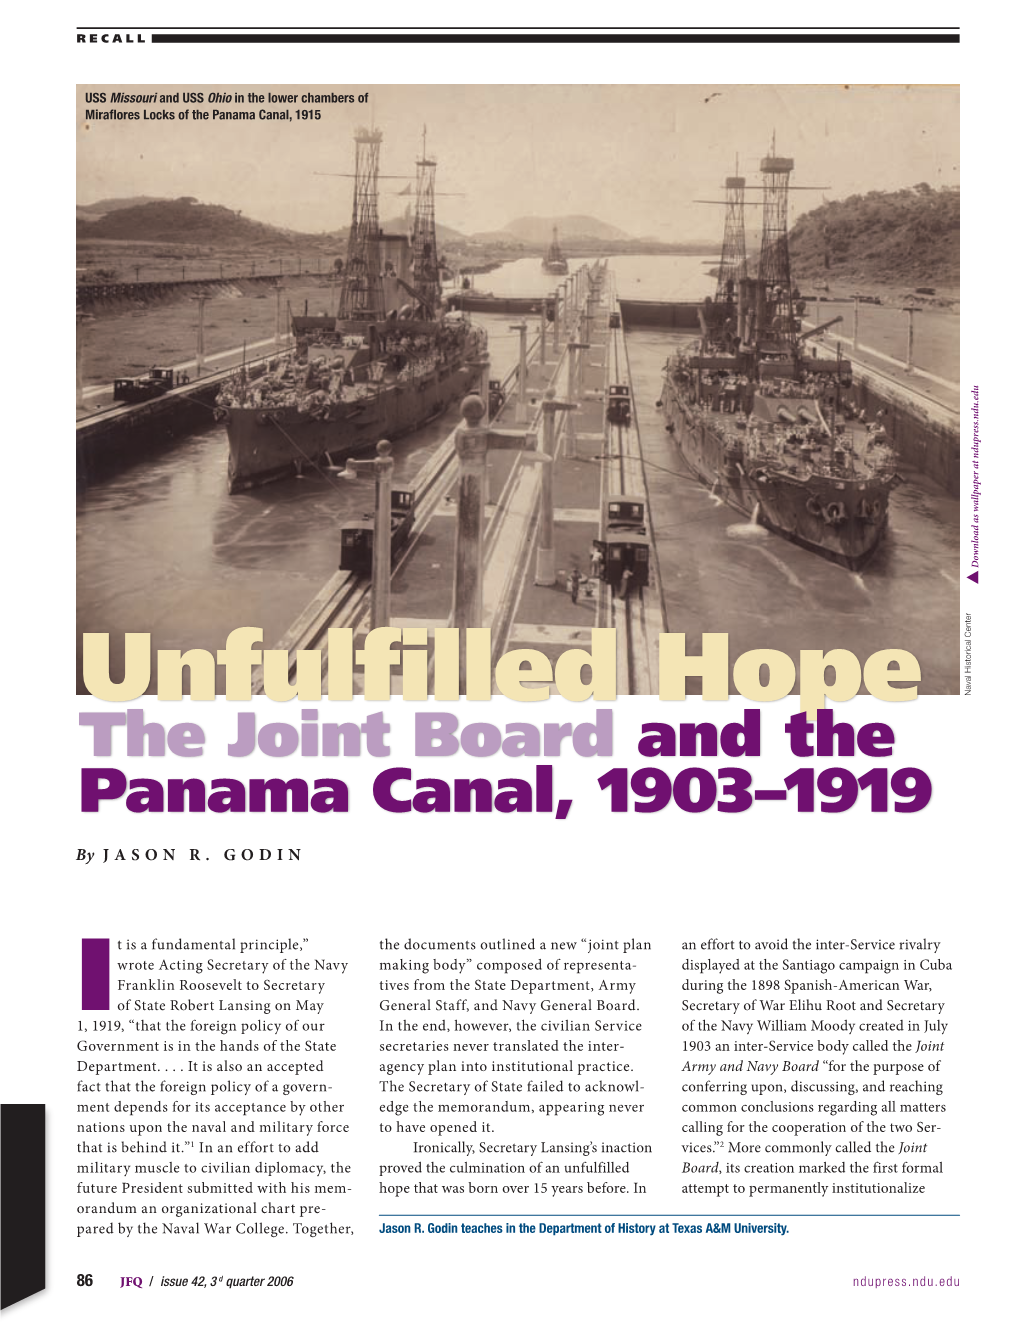 Joint Board and the Panama Canal 1903-1919:Unfulfilled Hope